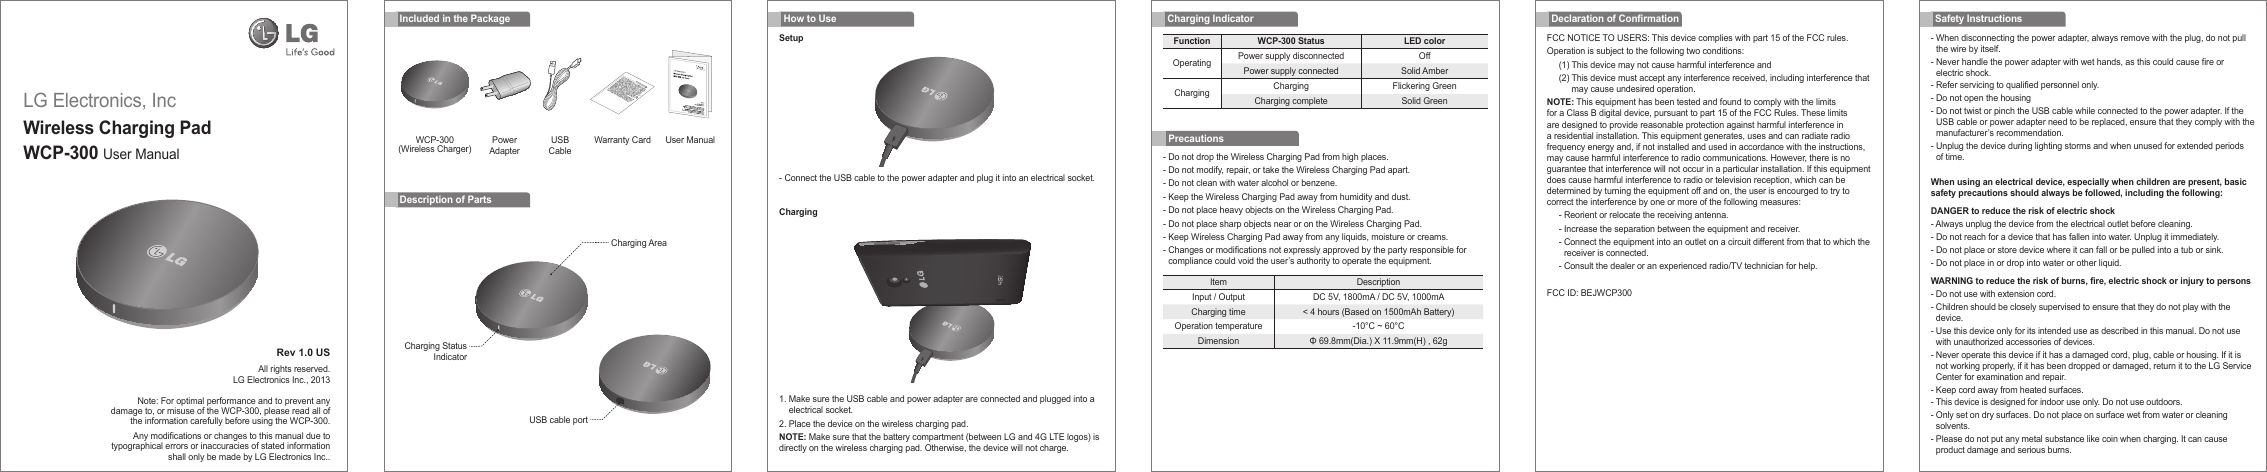 LG Electronics, IncWireless Charging PadWCP-300 User Manual Rev 1.0 USAll rights reserved.LG Electronics Inc., 2013Note: For optimal performance and to prevent any damage to, or misuse of the WCP-300, please read all of the information carefully before using the WCP-300.Any modications or changes to this manual due to typographical errors or inaccuracies of stated information shall only be made by LG Electronics Inc..- Do not drop the Wireless Charging Pad from high places.- Do not modify, repair, or take the Wireless Charging Pad apart.- Do not clean with water alcohol or benzene.- Keep the Wireless Charging Pad away from humidity and dust.- Do not place heavy objects on the Wireless Charging Pad.- Do not place sharp objects near or on the Wireless Charging Pad.- Keep Wireless Charging Pad away from any liquids, moisture or creams.-  Changes or modications not expressly approved by the party responsible for compliance could void the user’s authority to operate the equipment.Charging IndicatorIncluded in the PackageWCP-300 (Wireless Charger) Warranty CardPowerAdapterUSBCableUser ManualDescription of PartsFCC NOTICE TO USERS: This device complies with part 15 of the FCC rules.Operation is subject to the following two conditions:(1) This device may not cause harmful interference and(2)  This device must accept any interference received, including interference that may cause undesired operation.NOTE: This equipment has been tested and found to comply with the limits for a Class B digital device, pursuant to part 15 of the FCC Rules. These limits are designed to provide reasonable protection against harmful interference in a residential installation. This equipment generates, uses and can radiate radio frequency energy and, if not installed and used in accordance with the instructions, may cause harmful interference to radio communications. However, there is no guarantee that interference will not occur in a particular installation. If this equipment does cause harmful interference to radio or television reception, which can be determined by turning the equipment off and on, the user is encourged to try to correct the interference by one or more of the following measures:- Reorient or relocate the receiving antenna.- Increase the separation between the equipment and receiver.-  Connect the equipment into an outlet on a circuit different from that to which the receiver is connected.- Consult the dealer or an experienced radio/TV technician for help.FCC ID: BEJWCP300-  When disconnecting the power adapter, always remove with the plug, do not pull the wire by itself.-  Never handle the power adapter with wet hands, as this could cause fire or electric shock.- Refer servicing to qualified personnel only.- Do not open the housing-  Do not twist or pinch the USB cable while connected to the power adapter. If the USB cable or power adapter need to be replaced, ensure that they comply with the manufacturer’s recommendation.-  Unplug the device during lighting storms and when unused for extended periods of time.When using an electrical device, especially when children are present, basic safety precautions should always be followed, including the following:DANGER to reduce the risk of electric shock- Always unplug the device from the electrical outlet before cleaning.- Do not reach for a device that has fallen into water. Unplug it immediately.- Do not place or store device where it can fall or be pulled into a tub or sink.- Do not place in or drop into water or other liquid.WARNING to reduce the risk of burns, re, electric shock or injury to persons-  Do not use with extension cord.-  Children should be closely supervised to ensure that they do not play with the device.-  Use this device only for its intended use as described in this manual. Do not use with unauthorized accessories of devices.-  Never operate this device if it has a damaged cord, plug, cable or housing. If it is not working properly, if it has been dropped or damaged, return it to the LG Service Center for examination and repair.- Keep cord away from heated surfaces.- This device is designed for indoor use only. Do not use outdoors.-  Only set on dry surfaces. Do not place on surface wet from water or cleaning solvents. -  Please do not put any metal substance like coin when charging. It can cause product damage and serious burns.Declaration of Conrmation Safety InstructionsHow to UseSetupChargingItem DescriptionInput / Output DC 5V, 1800mA / DC 5V, 1000mACharging time &lt; 4 hours (Based on 1500mAh Battery)Operation temperature -10°C ~ 60°CDimension Φ 69.8mm(Dia.) X 11.9mm(H) , 62gFunction WCP-300 Status LED colorOperating Power supply disconnected OffPower supply connected Solid AmberCharging Charging Flickering GreenCharging complete Solid GreenPrecautions1.  Make sure the USB cable and power adapter are connected and plugged into a electrical socket.2. Place the device on the wireless charging pad.NOTE: Make sure that the battery compartment (between LG and 4G LTE logos) is directly on the wireless charging pad. Otherwise, the device will not charge.-  Connect the USB cable to the power adapter and plug it into an electrical socket.Charging AreaCharging StatusIndicatorUSB cable port